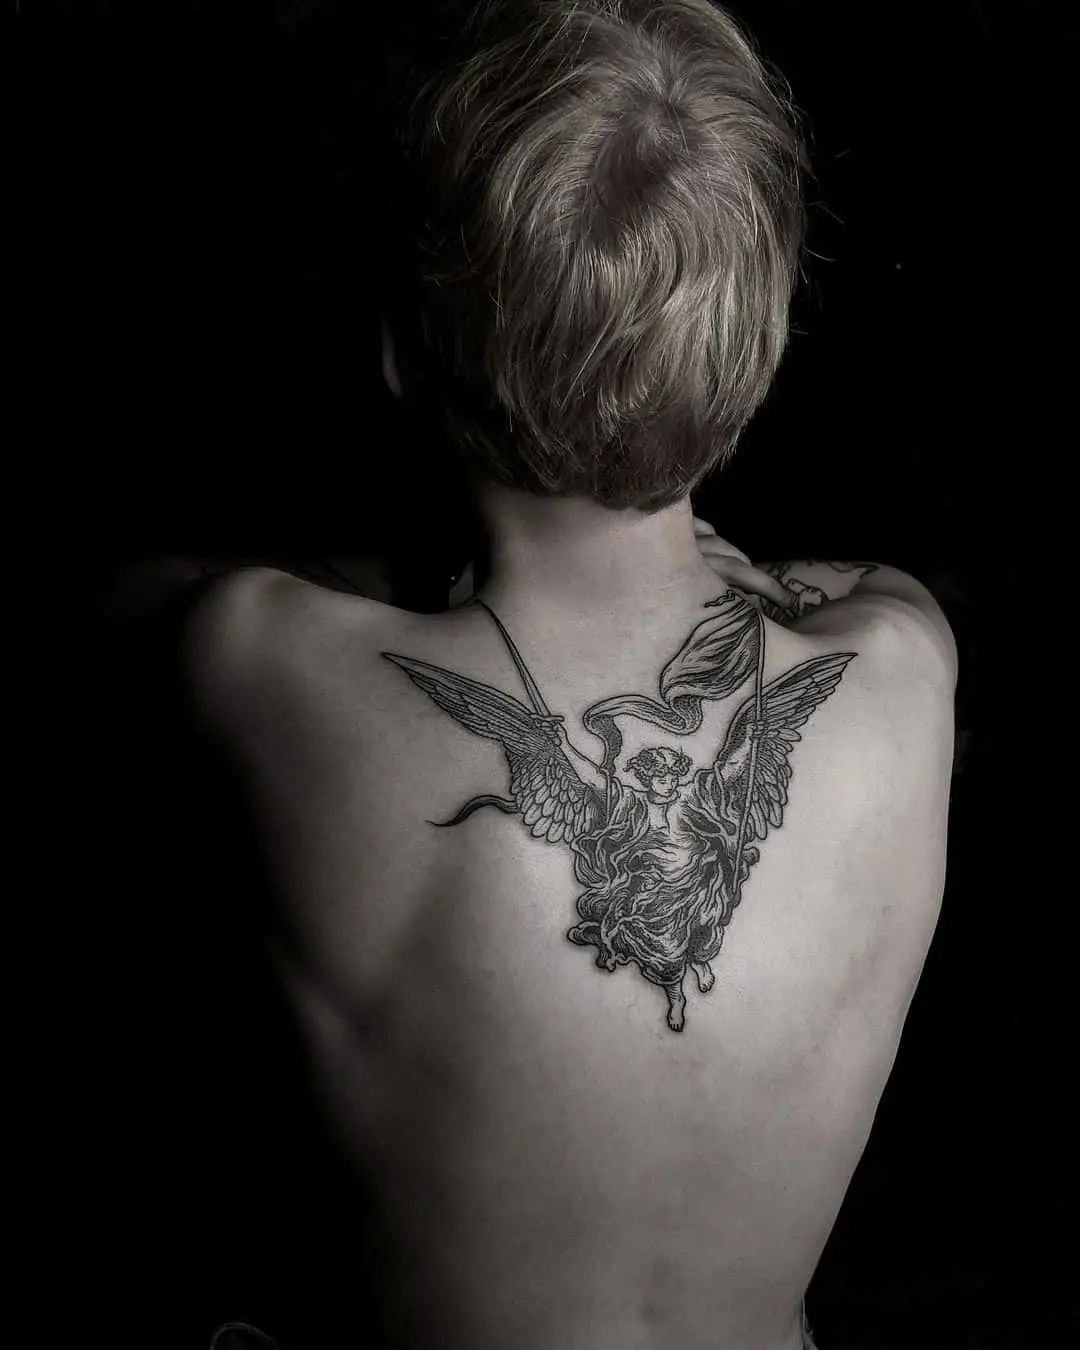 Angel wing tattoo design on the back